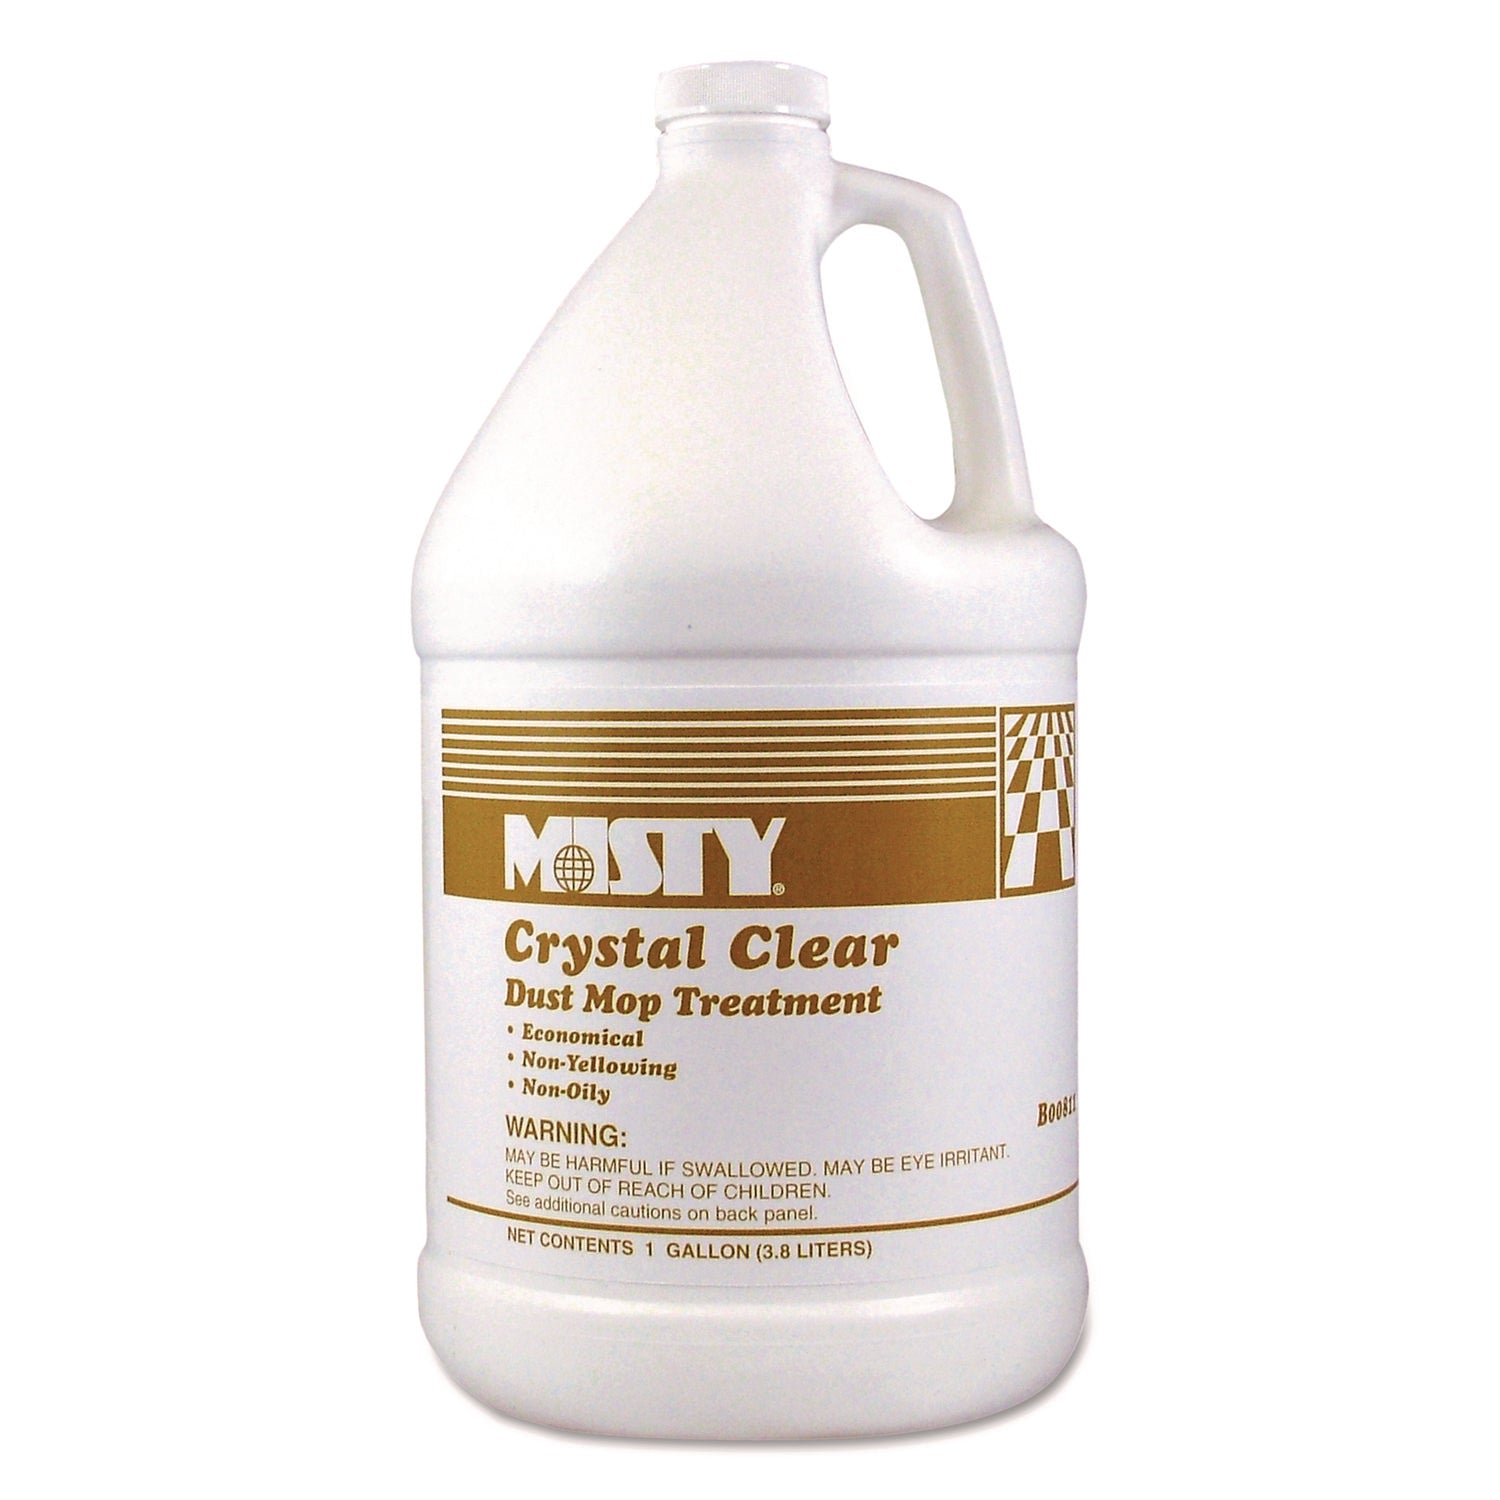 Crystal Clear Dust Mop Treatment, Slightly Fruity Scent, 1 gal Bottle - 1